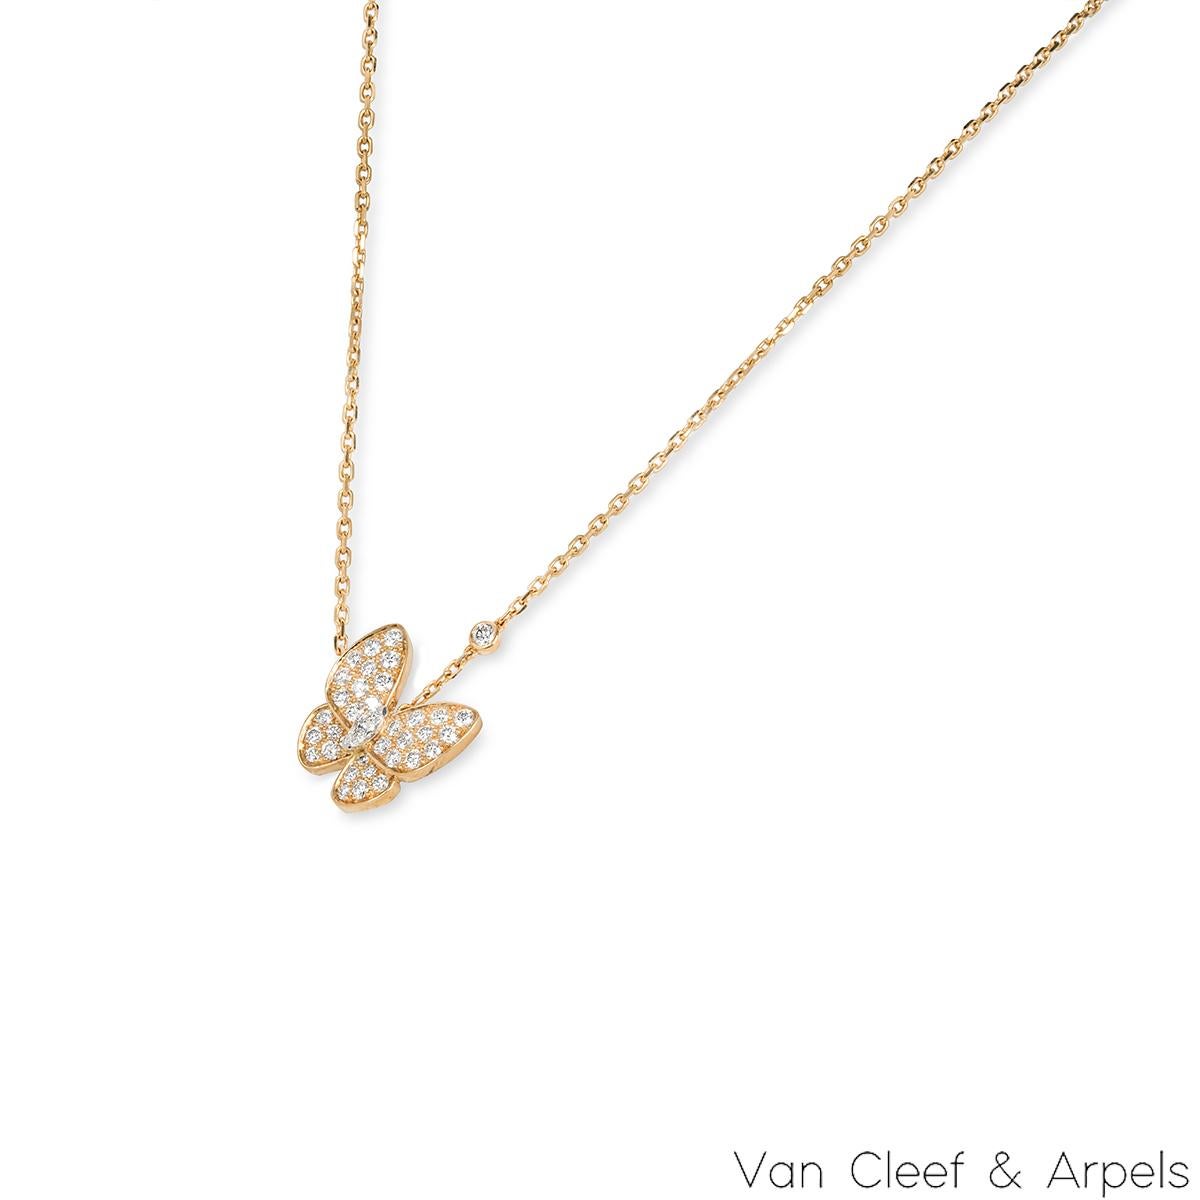 A charming 18k yellow gold diamond pendant by Van Cleef & Arpels from the Two Butterfly collection. The pendant features a butterfly motif set to the centre with marquise cut diamond, a single bezel set diamond on the chain and 34 round brilliant